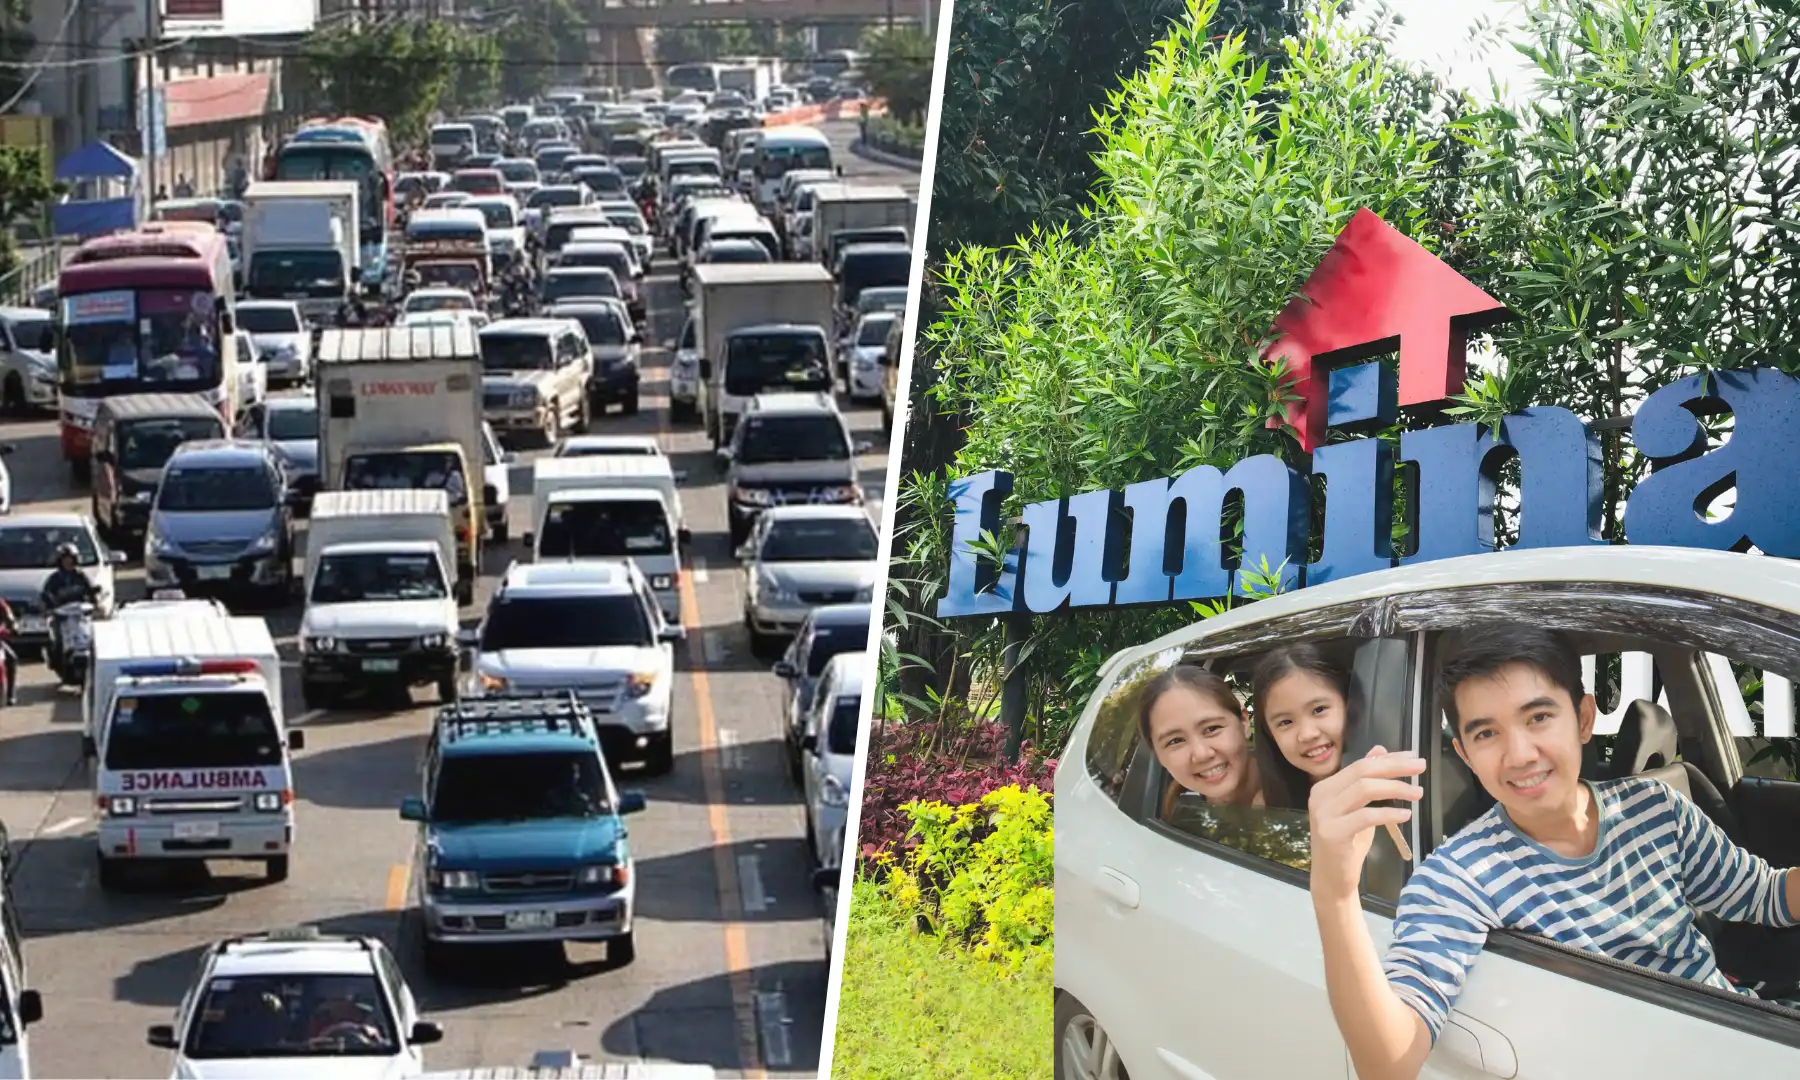 Tips to Avoid Traffic Jams and Save Yourself Some Travel Time